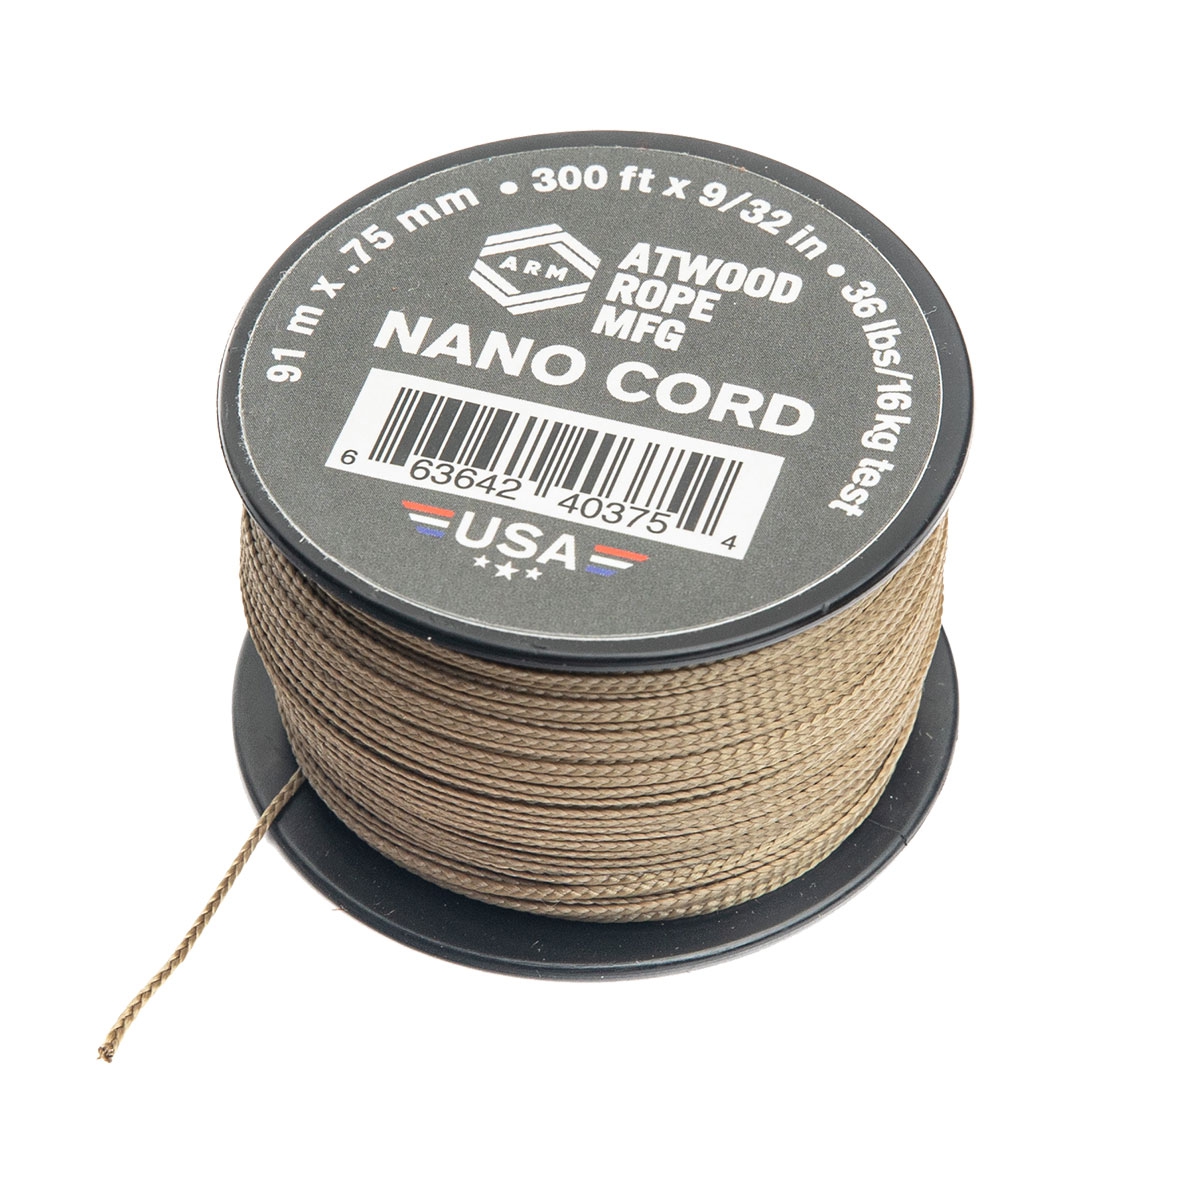 Atwood Rope .75 mm Nano Cord, 91 m / 300 ft 